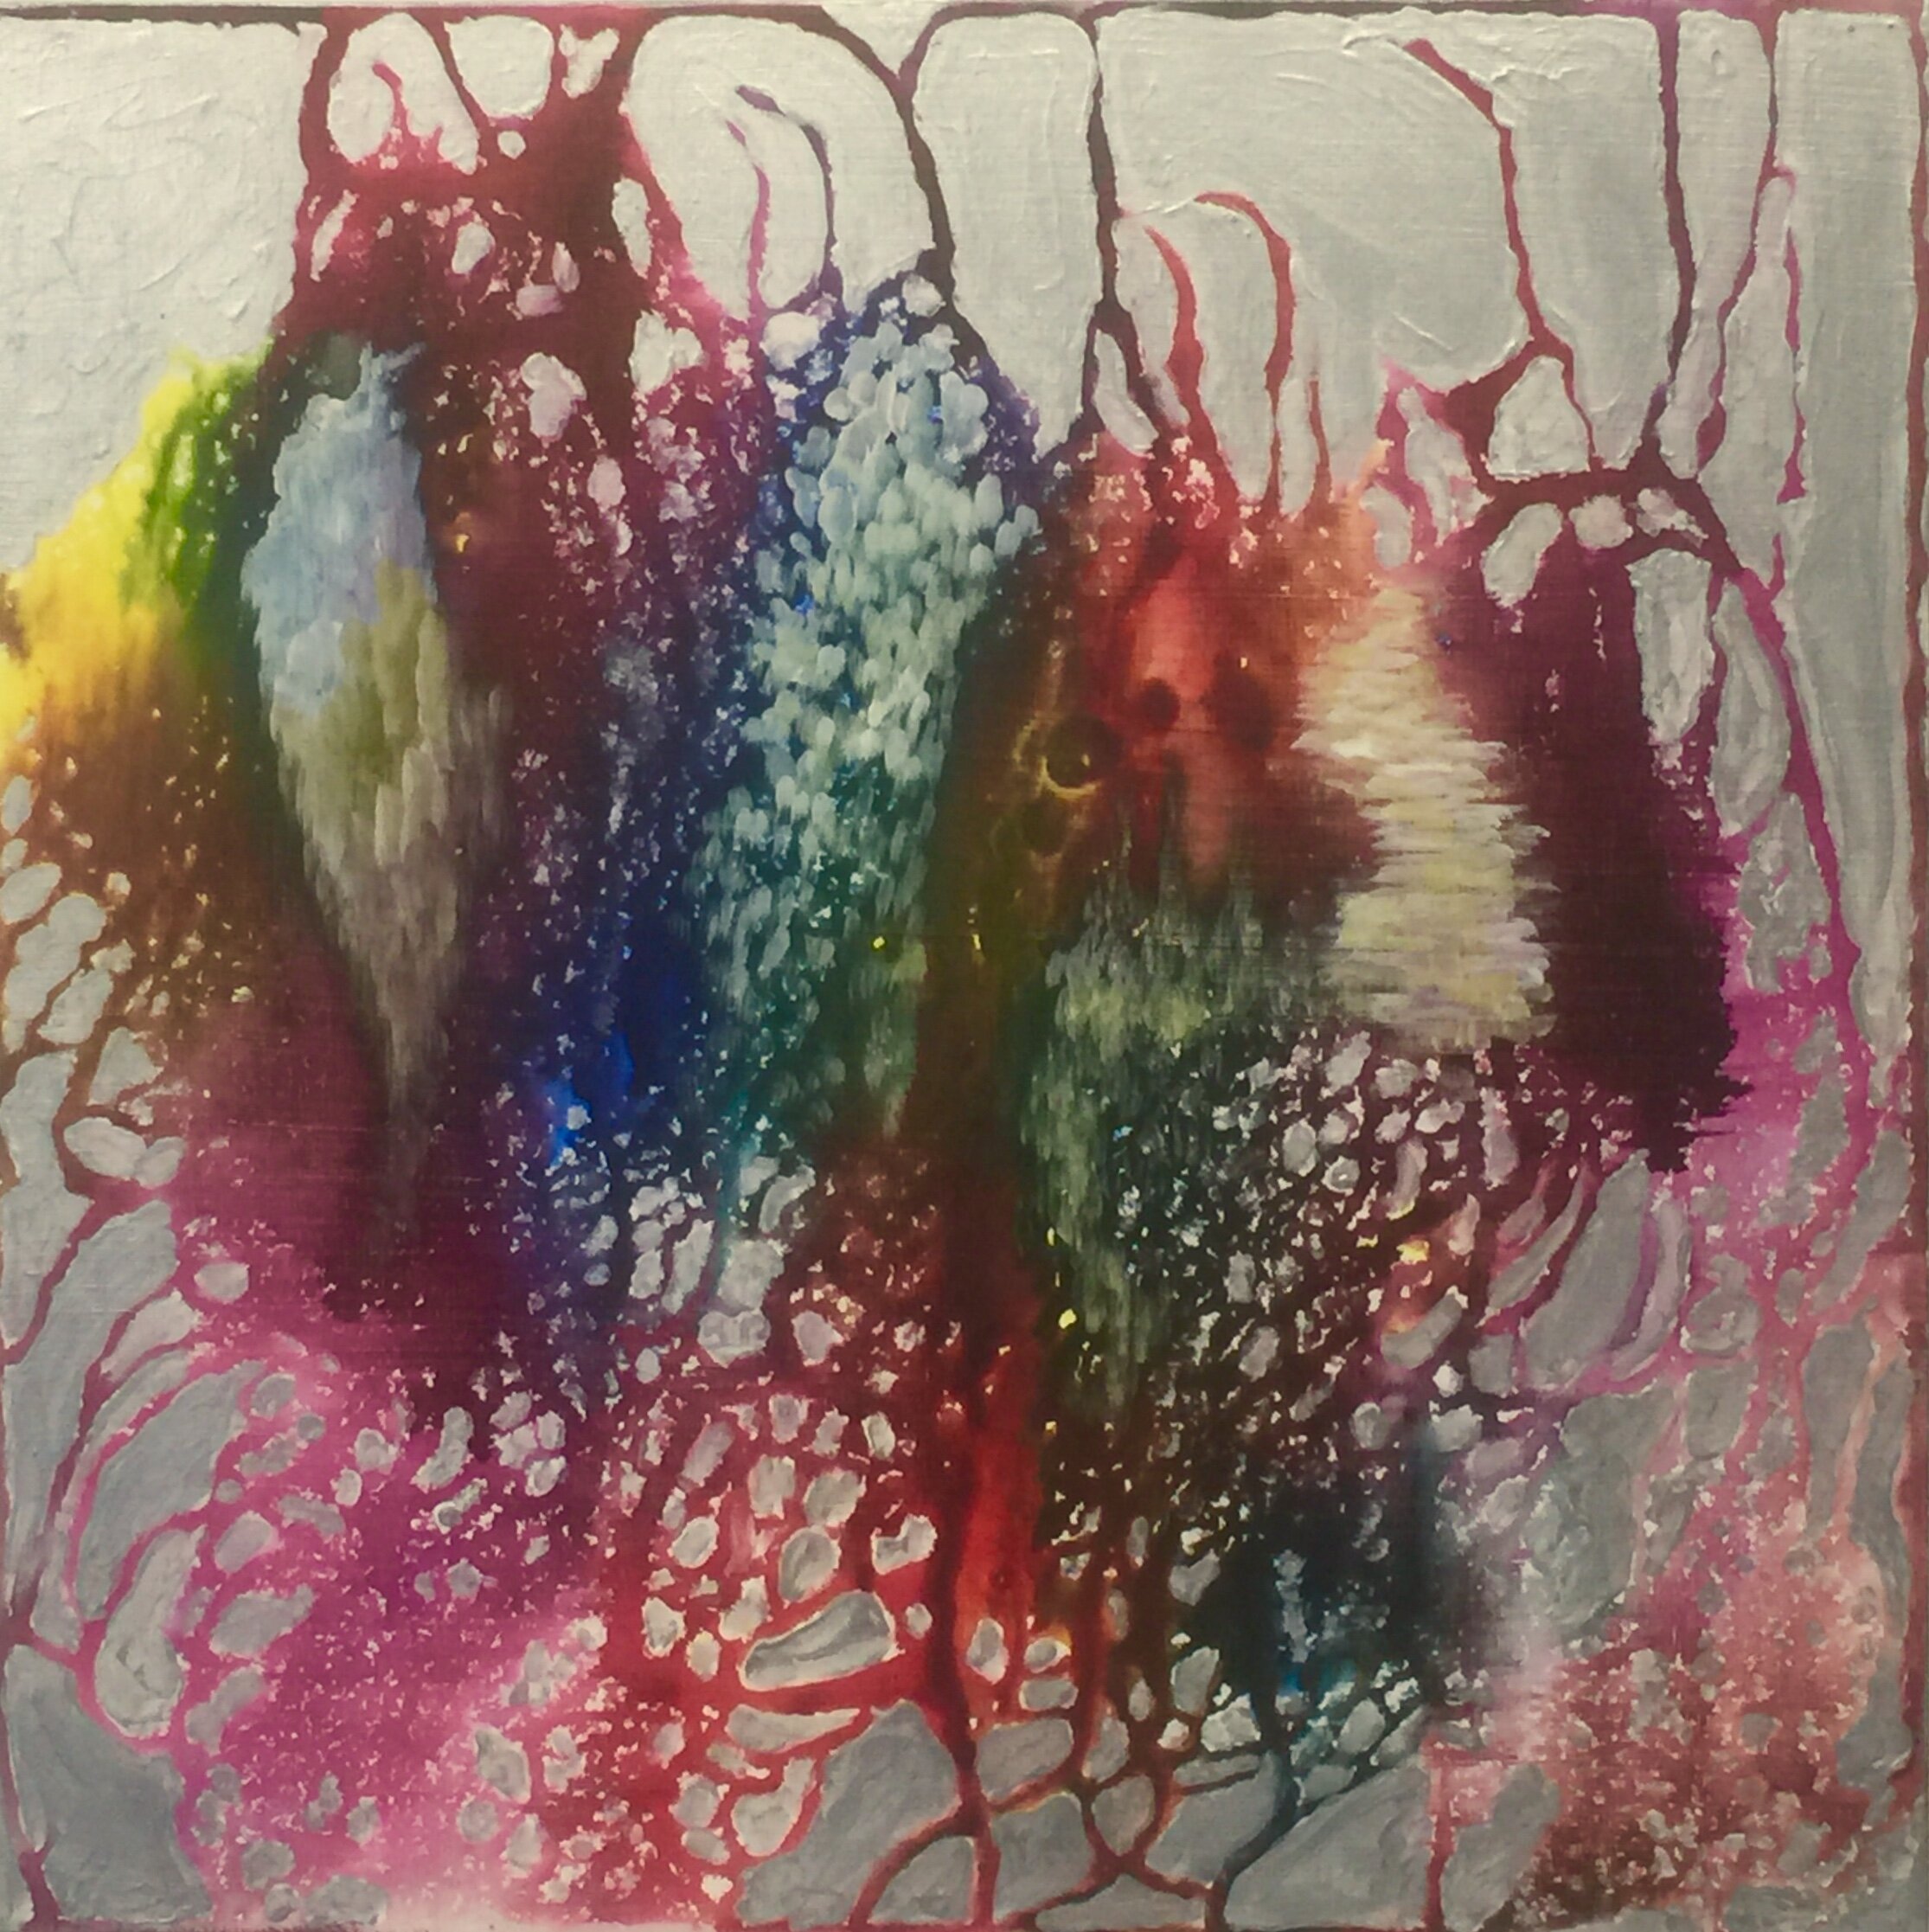  Maggie Davis   The jellyfish are weeping,   2019 Acrylic on panel 16 x 16 in. YIMBY price $1,500 